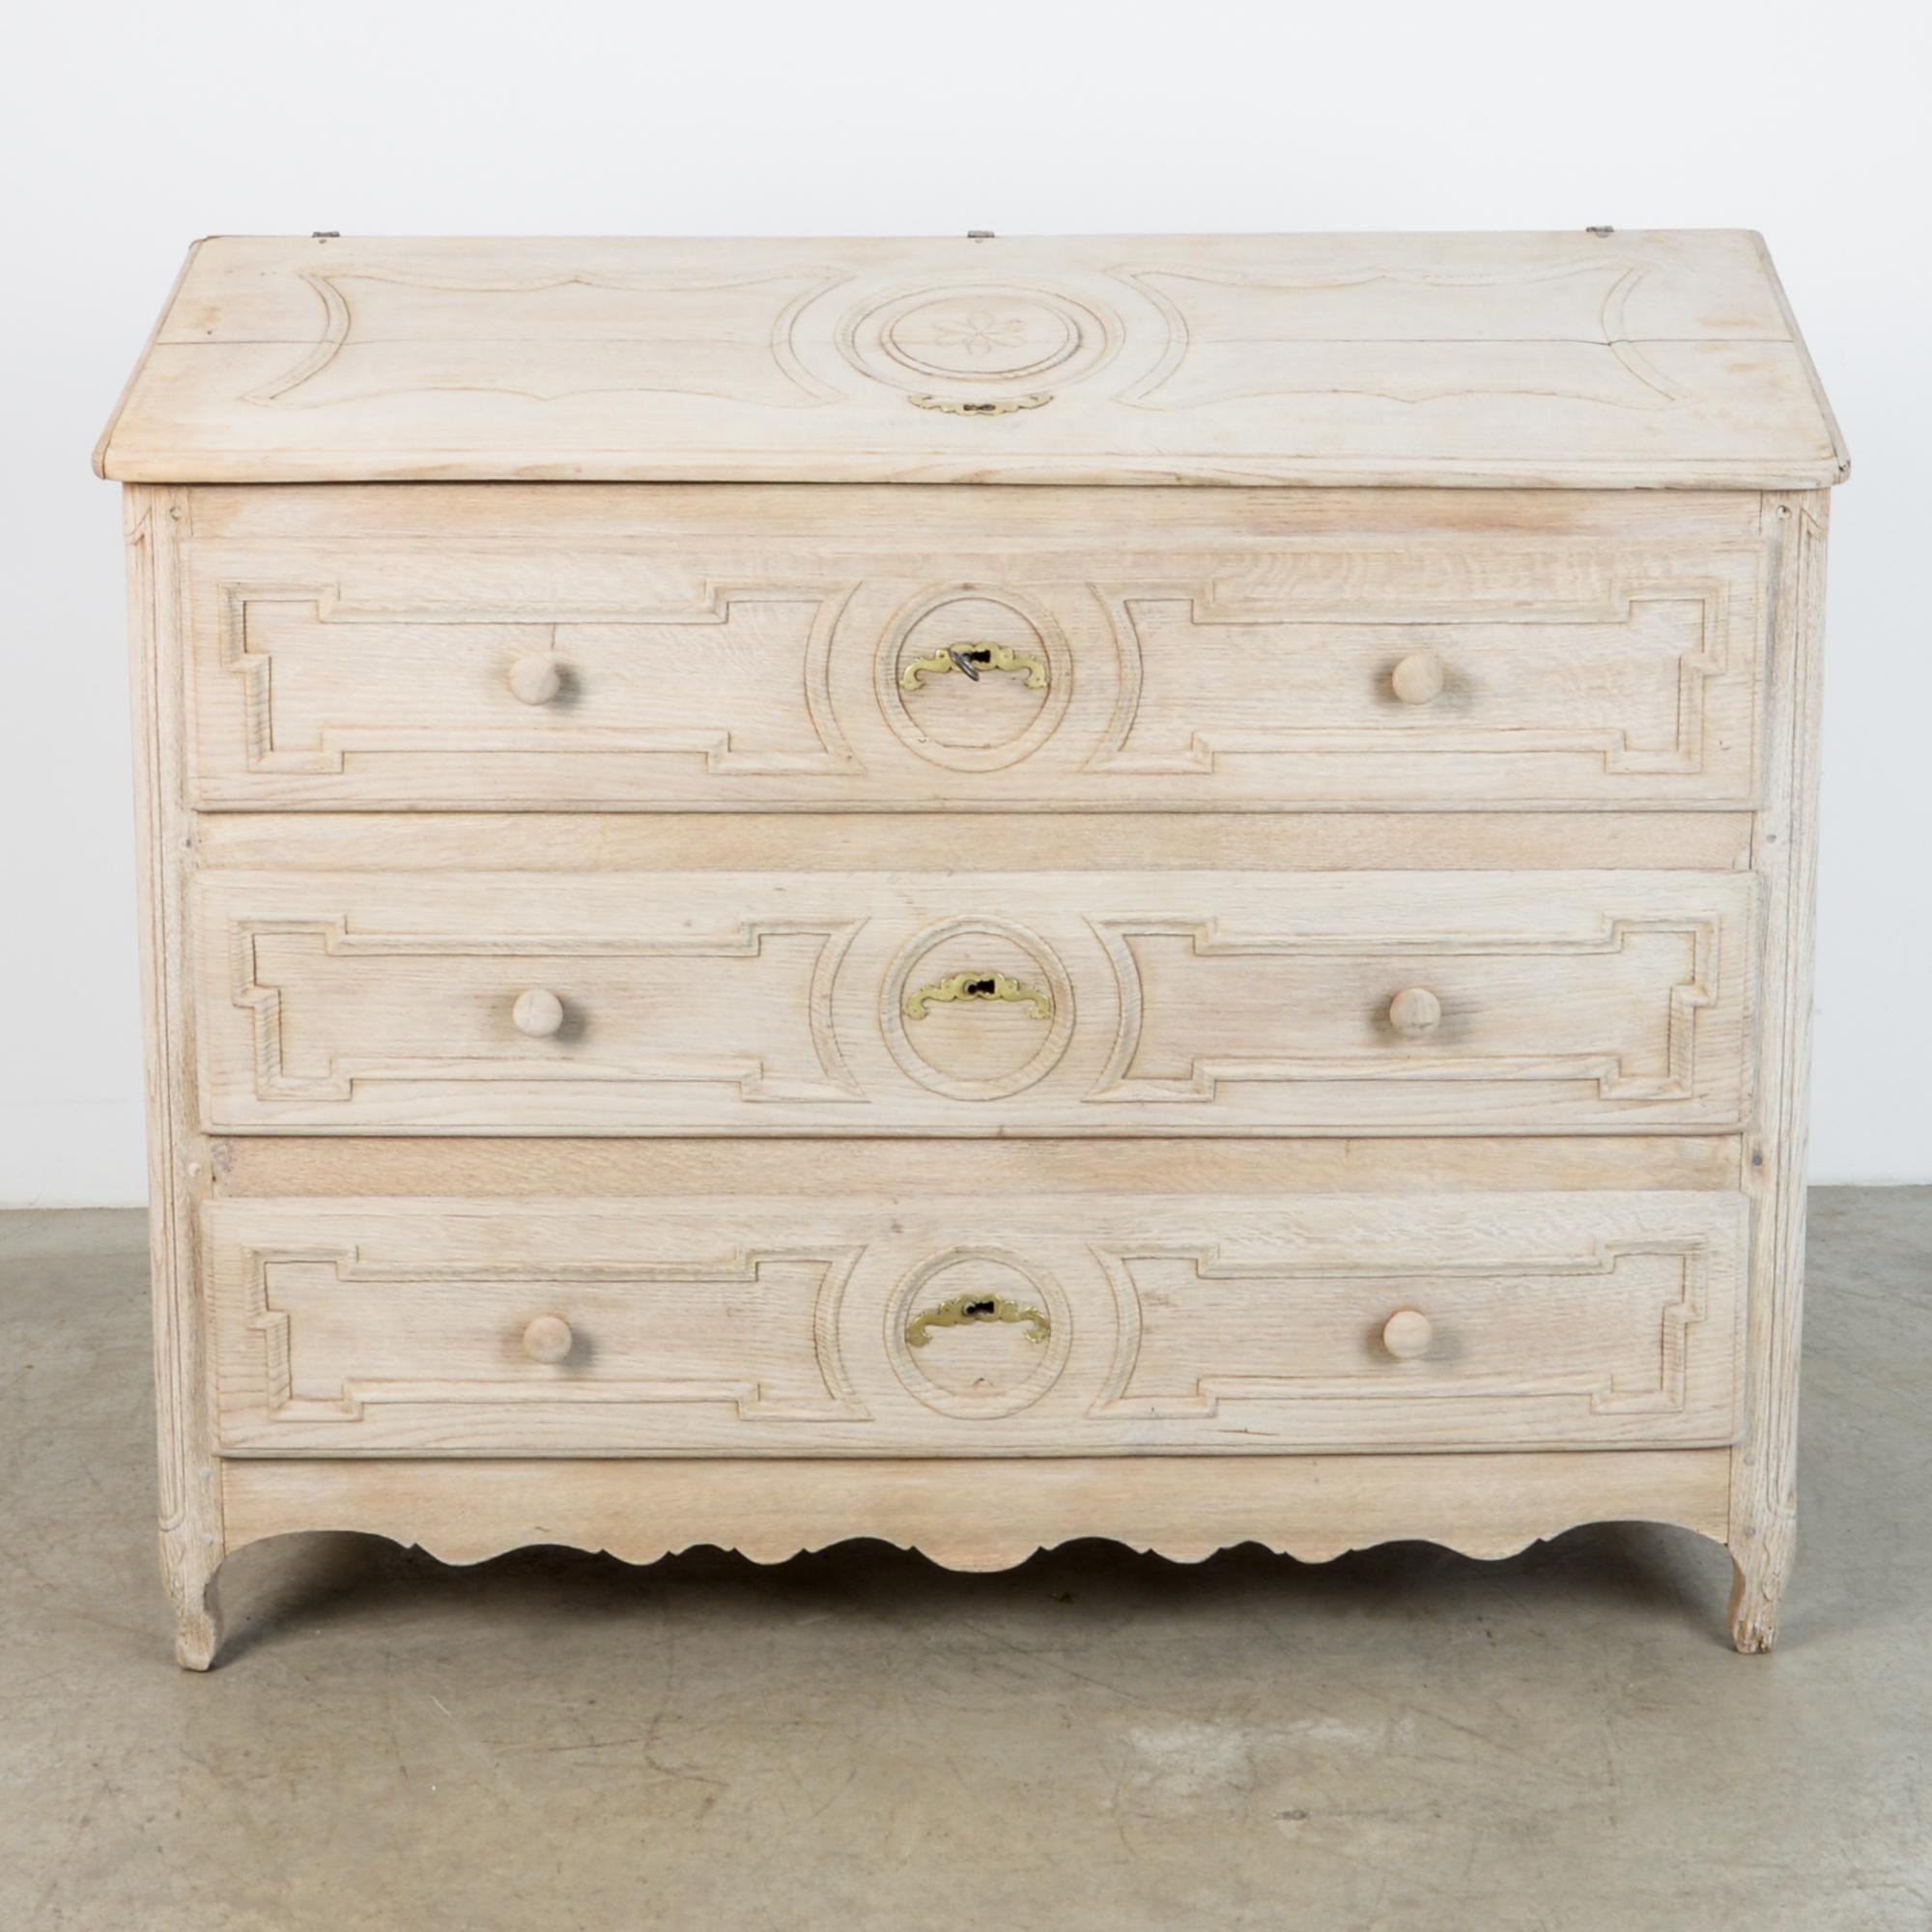 From France circa 1860 this three drawer cabinet is topped with a locked upper panel, originally fitted with a folding writing desk. Bleached oak finish gives this cabinet a bright and contemporary presentation, while highlighting the craftsmanship,